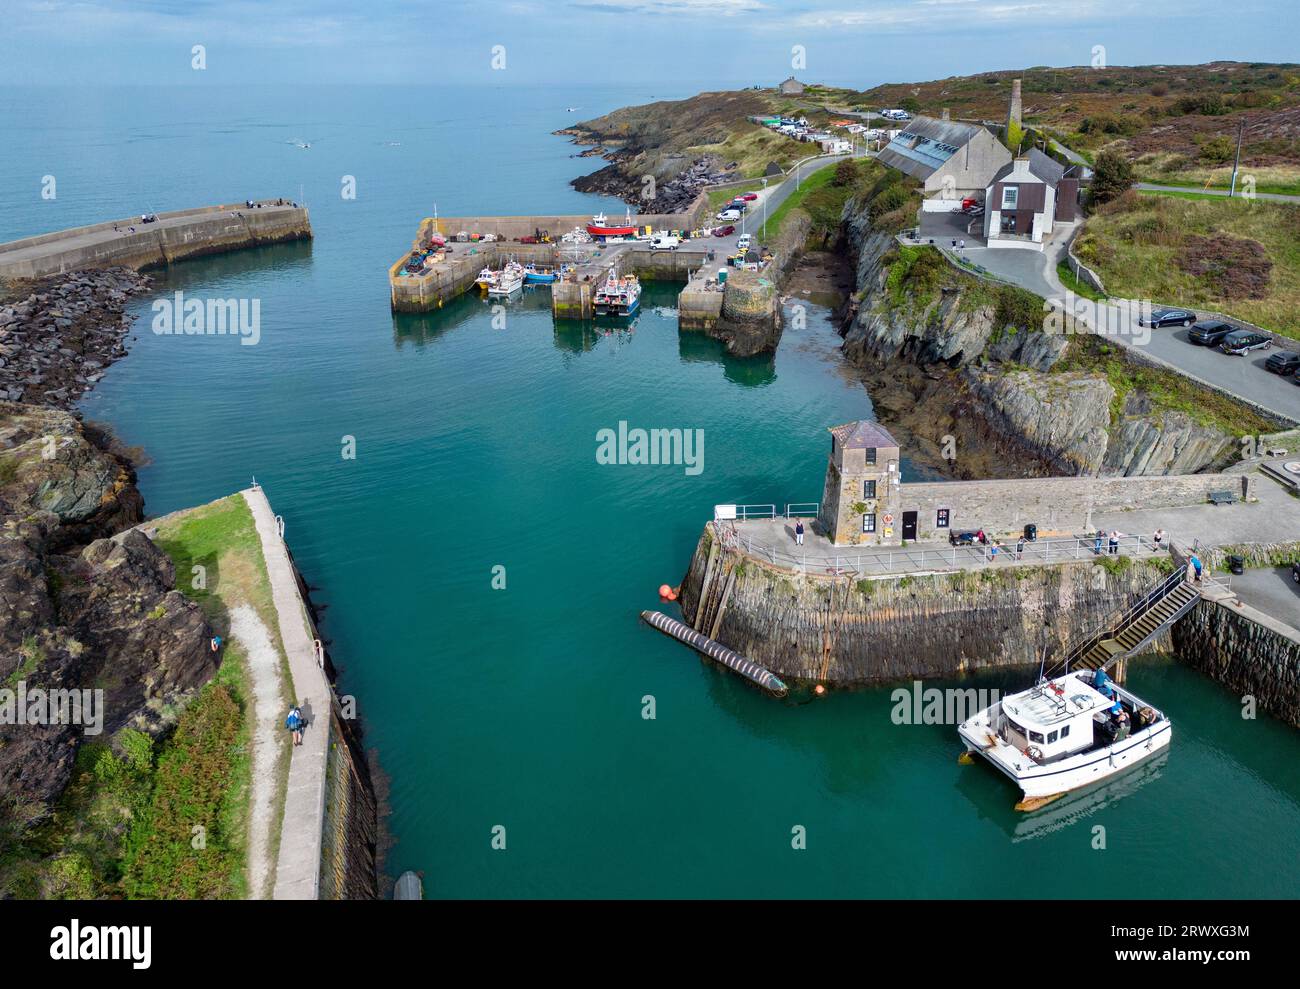 Aerial view of the harbor at Amlwch on the island of Anglesey in north Wales in the United Kingdom. Stock Photo